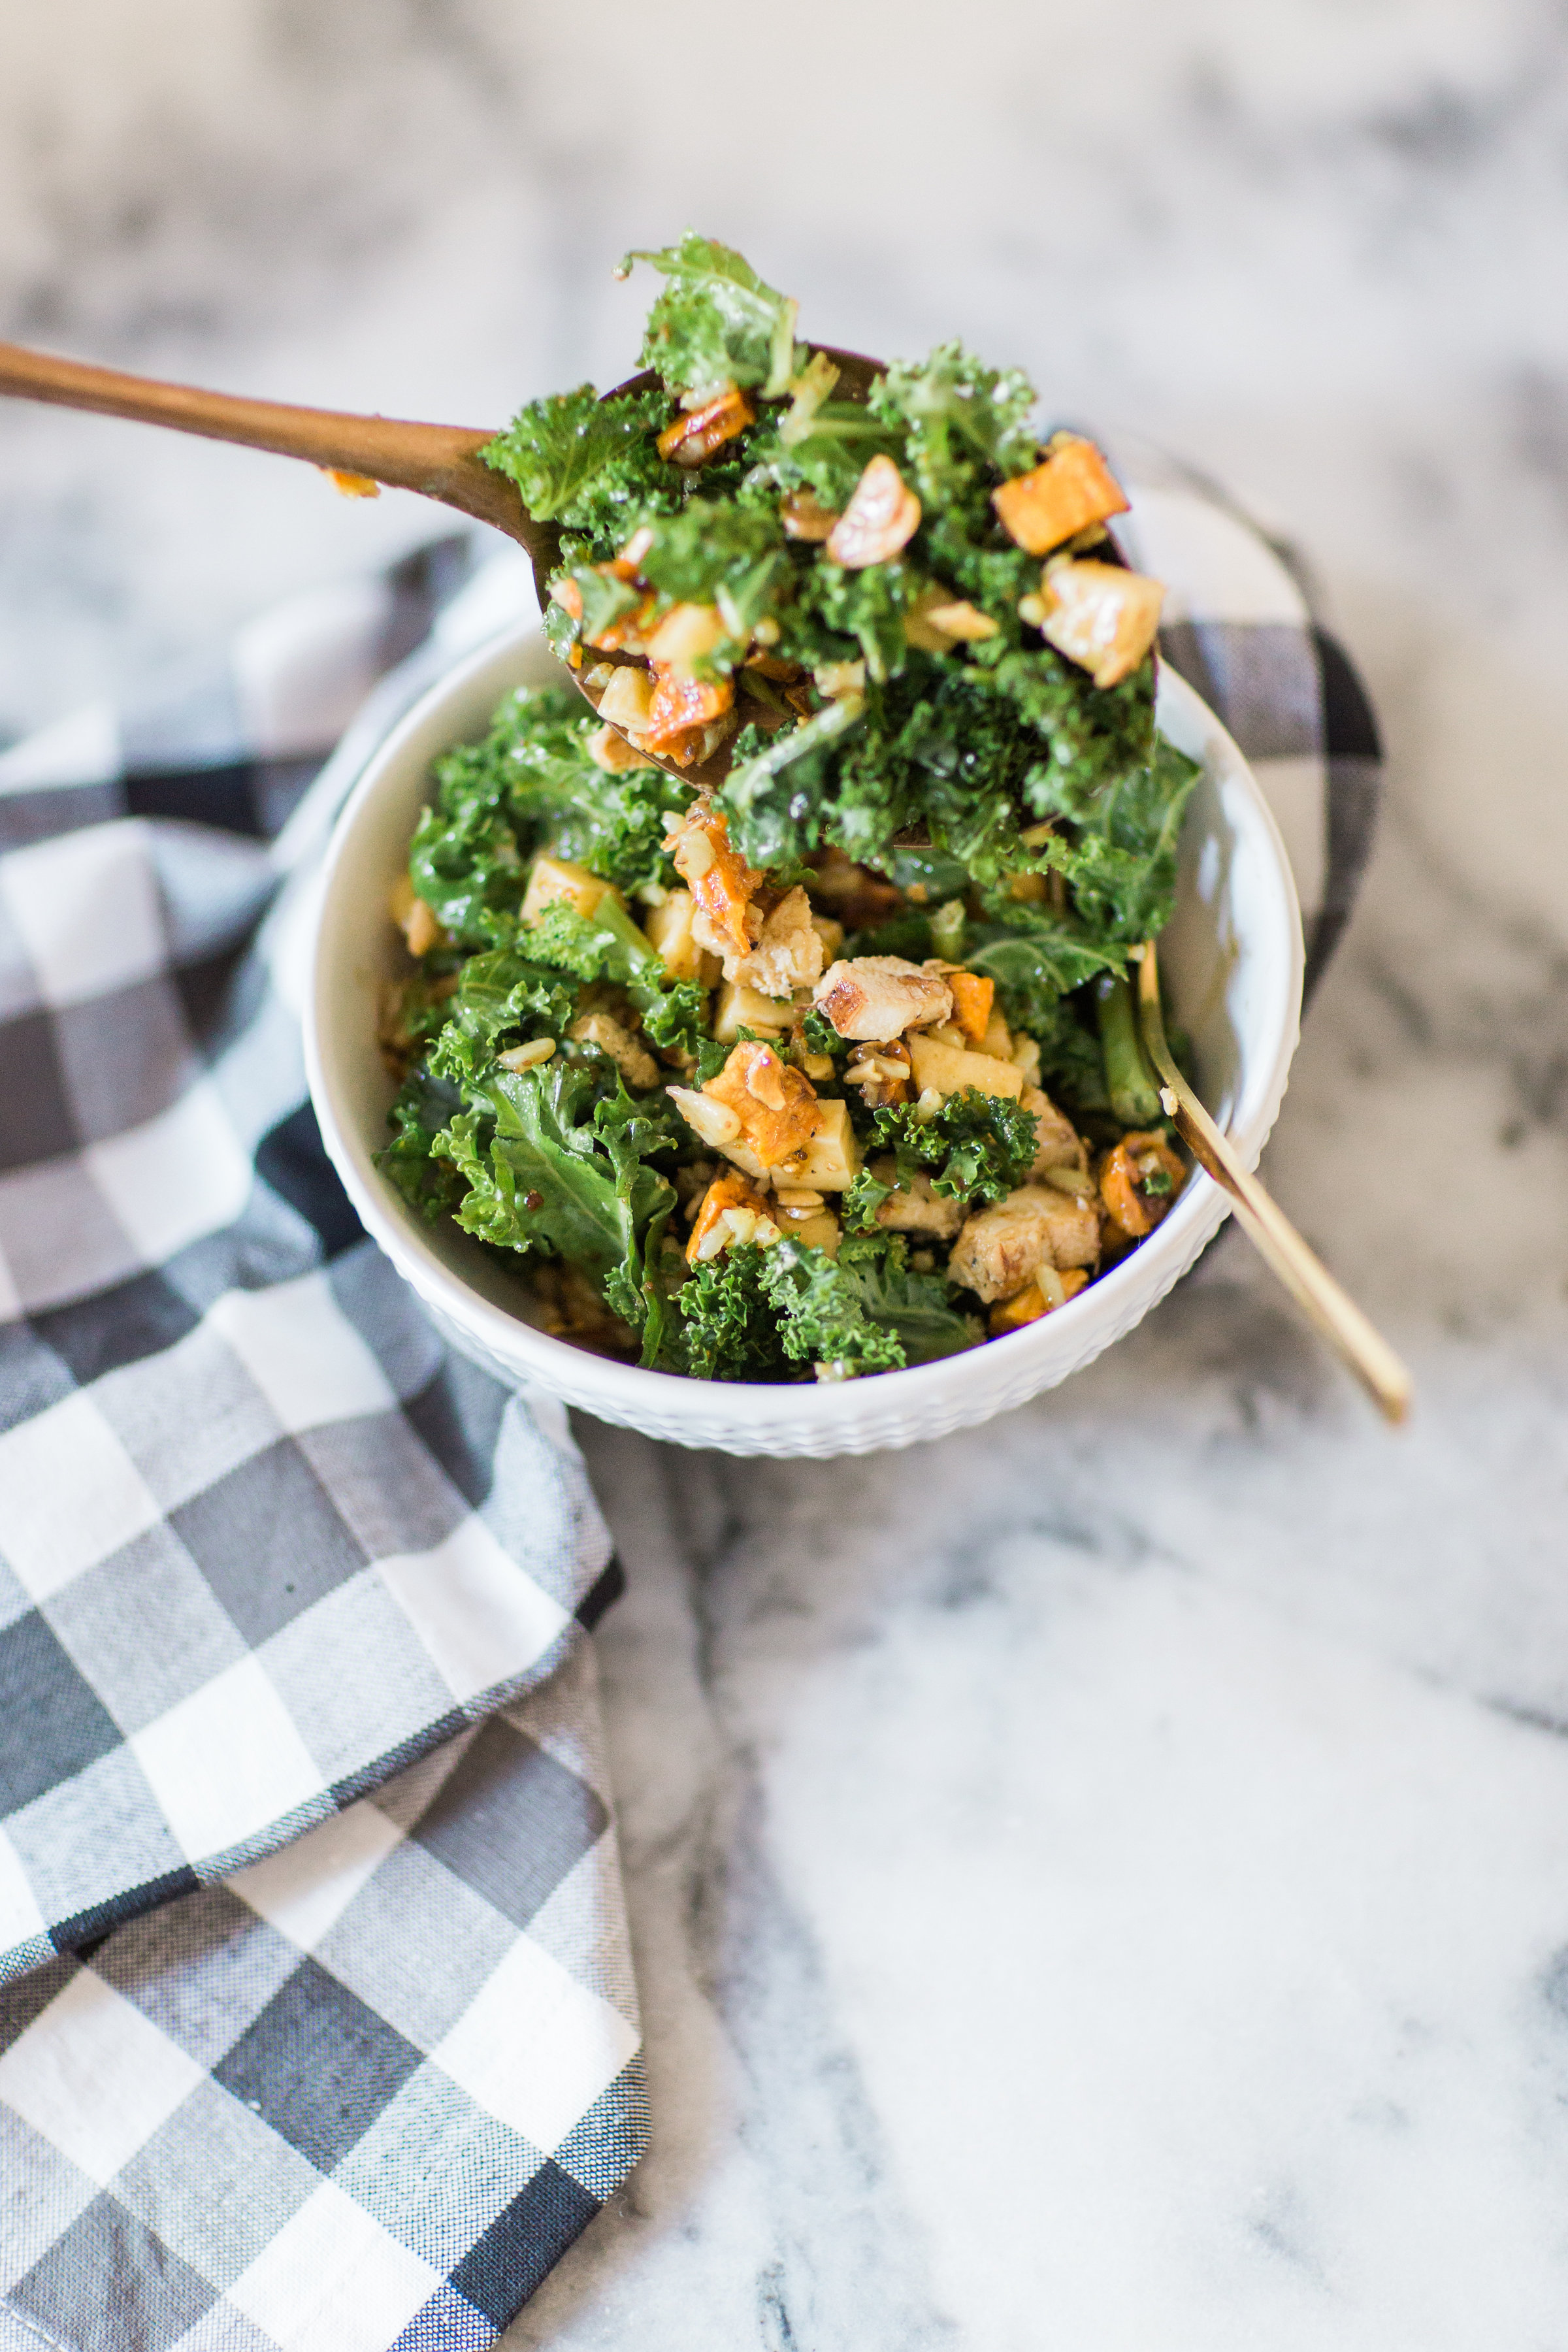 How to make the most amazing knockoff version of the harvest bowl salad at sweetgreen. This one is salad done right. Click through for the recipe. | glitterinc.com | @glitterinc